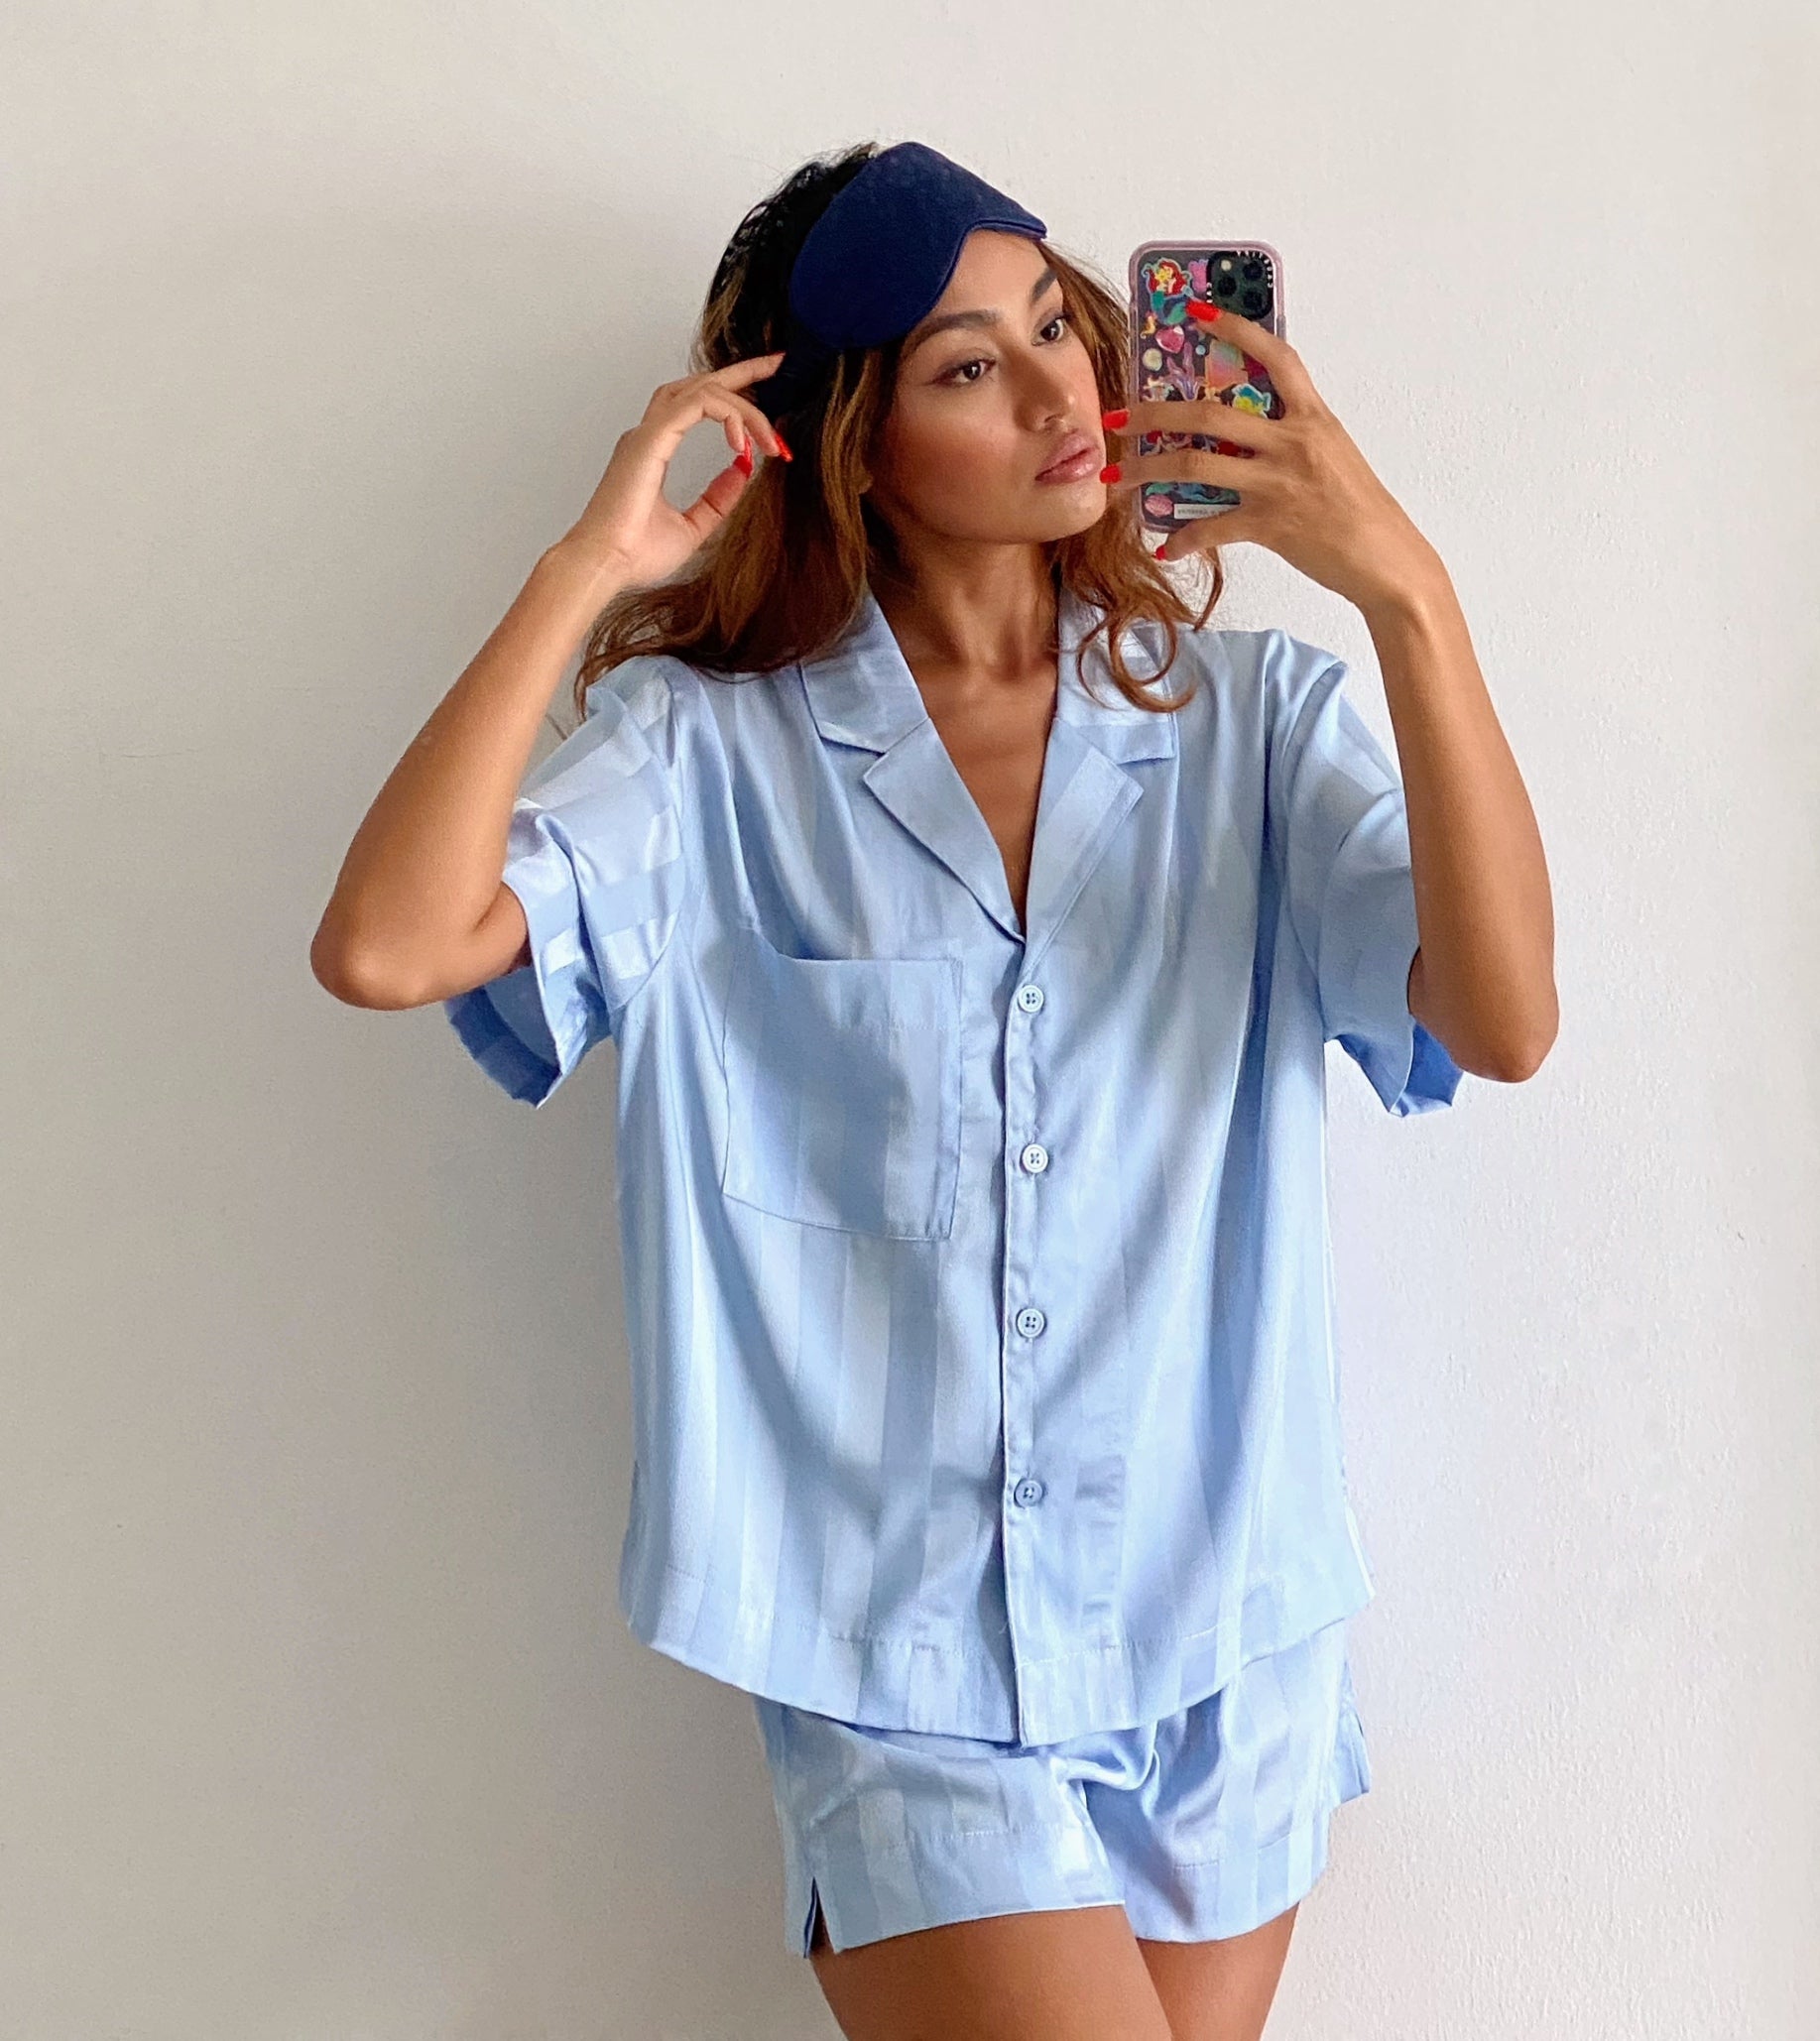 Crafted with 100% soft and smooth viscose. Pair it with a sleep eye mask that matches. Shop now a pair of this pyjama set while looking cute and stylish on a casual day. An essential sleepwear for everyday comfort in your own home.